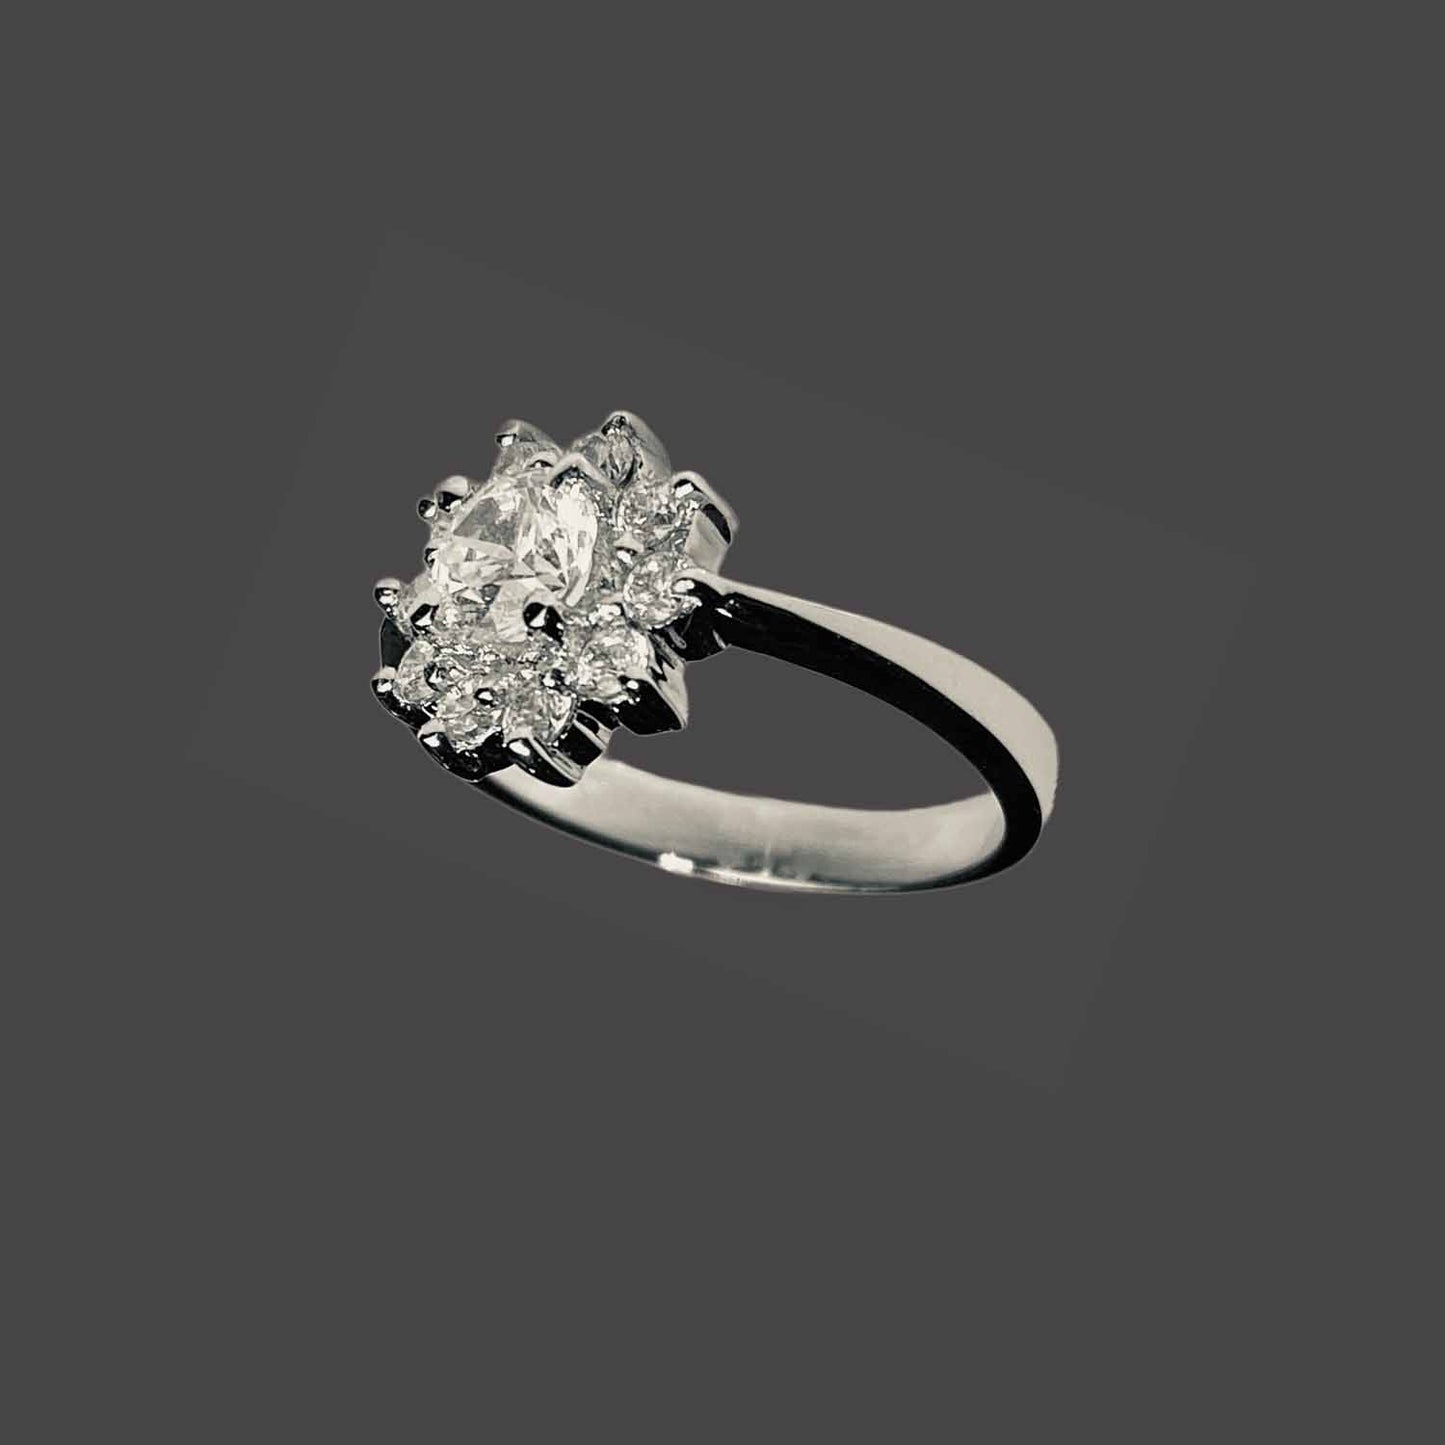 Flower ring with crystals